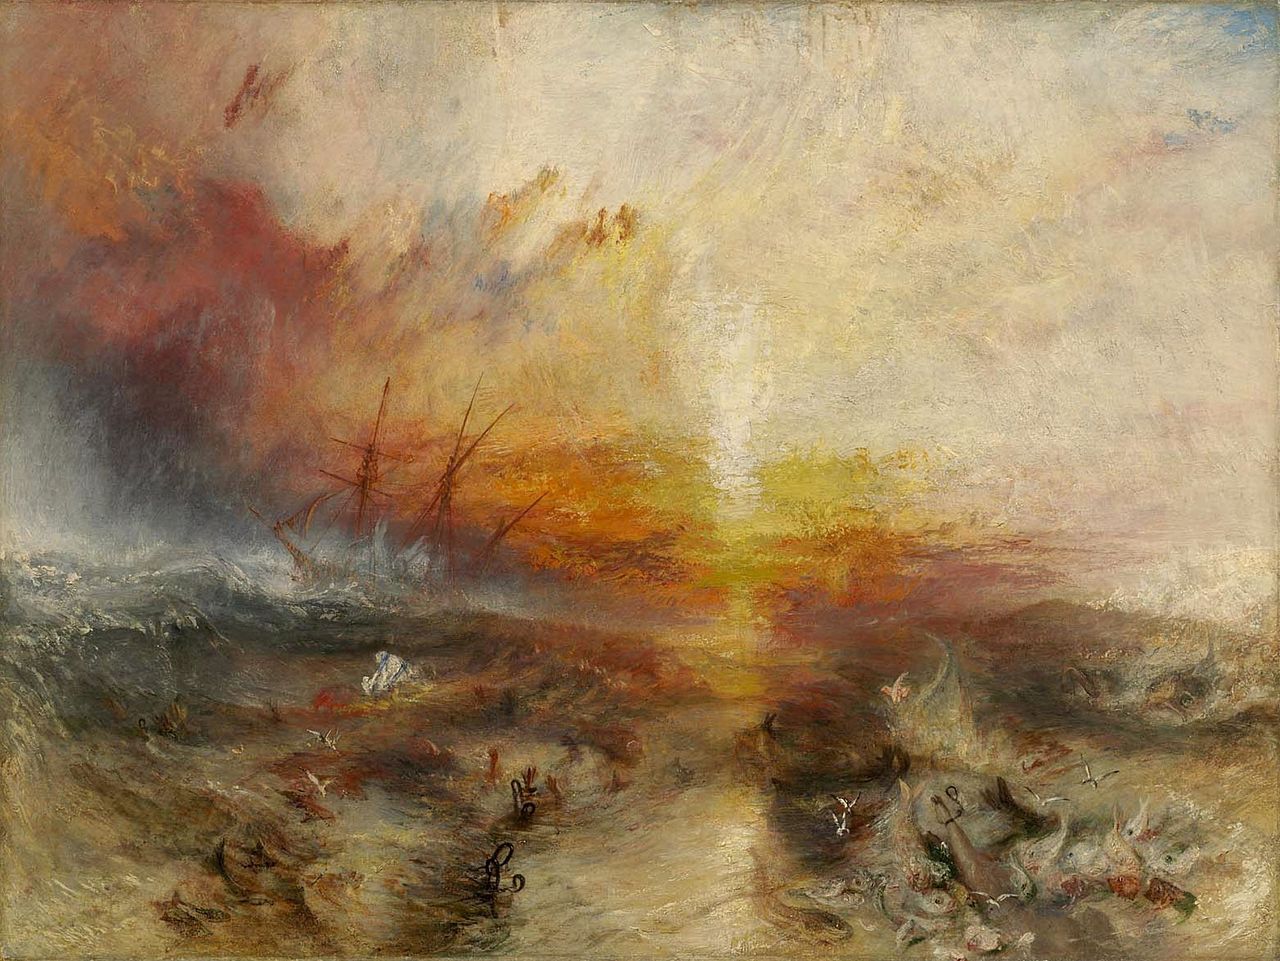 Slave Ship (Slavers Throwing Overboard the Dead and Dying) by Joseph Mallord William Turner - 1814 - 90.8 x 122.6 cm Museum of Fine Arts Boston